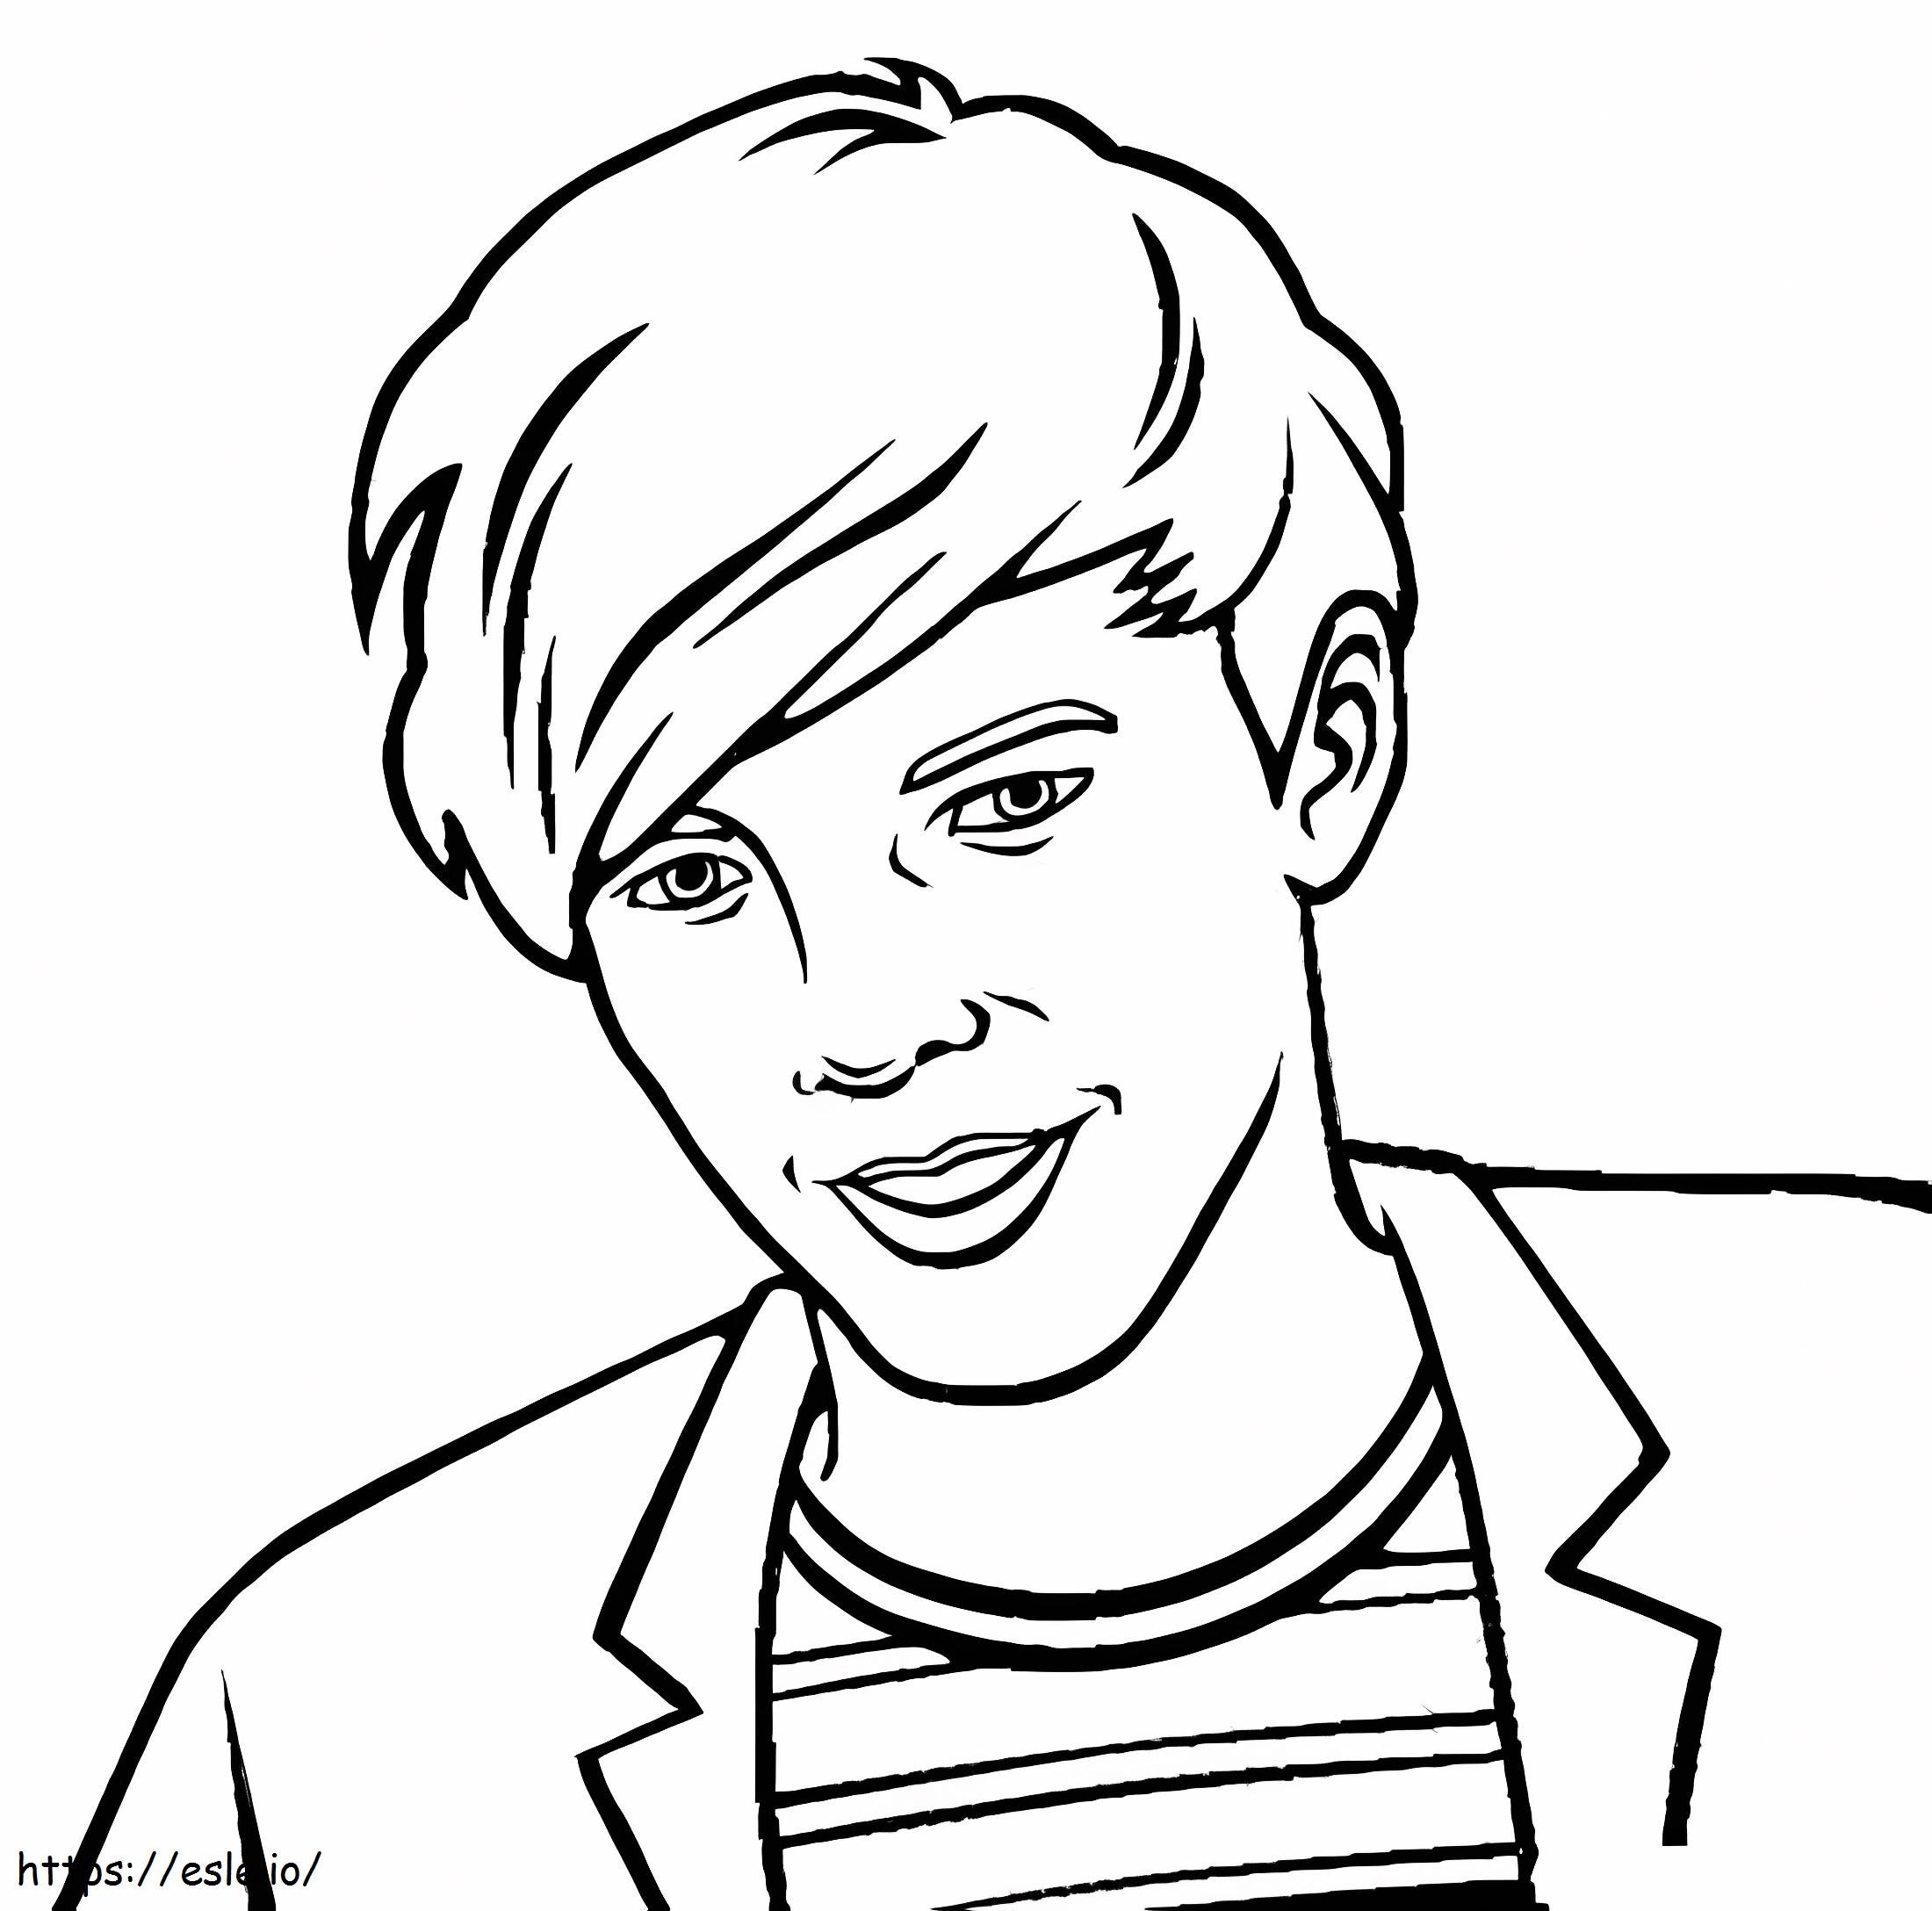 Louis tomlinson one directn coloring page